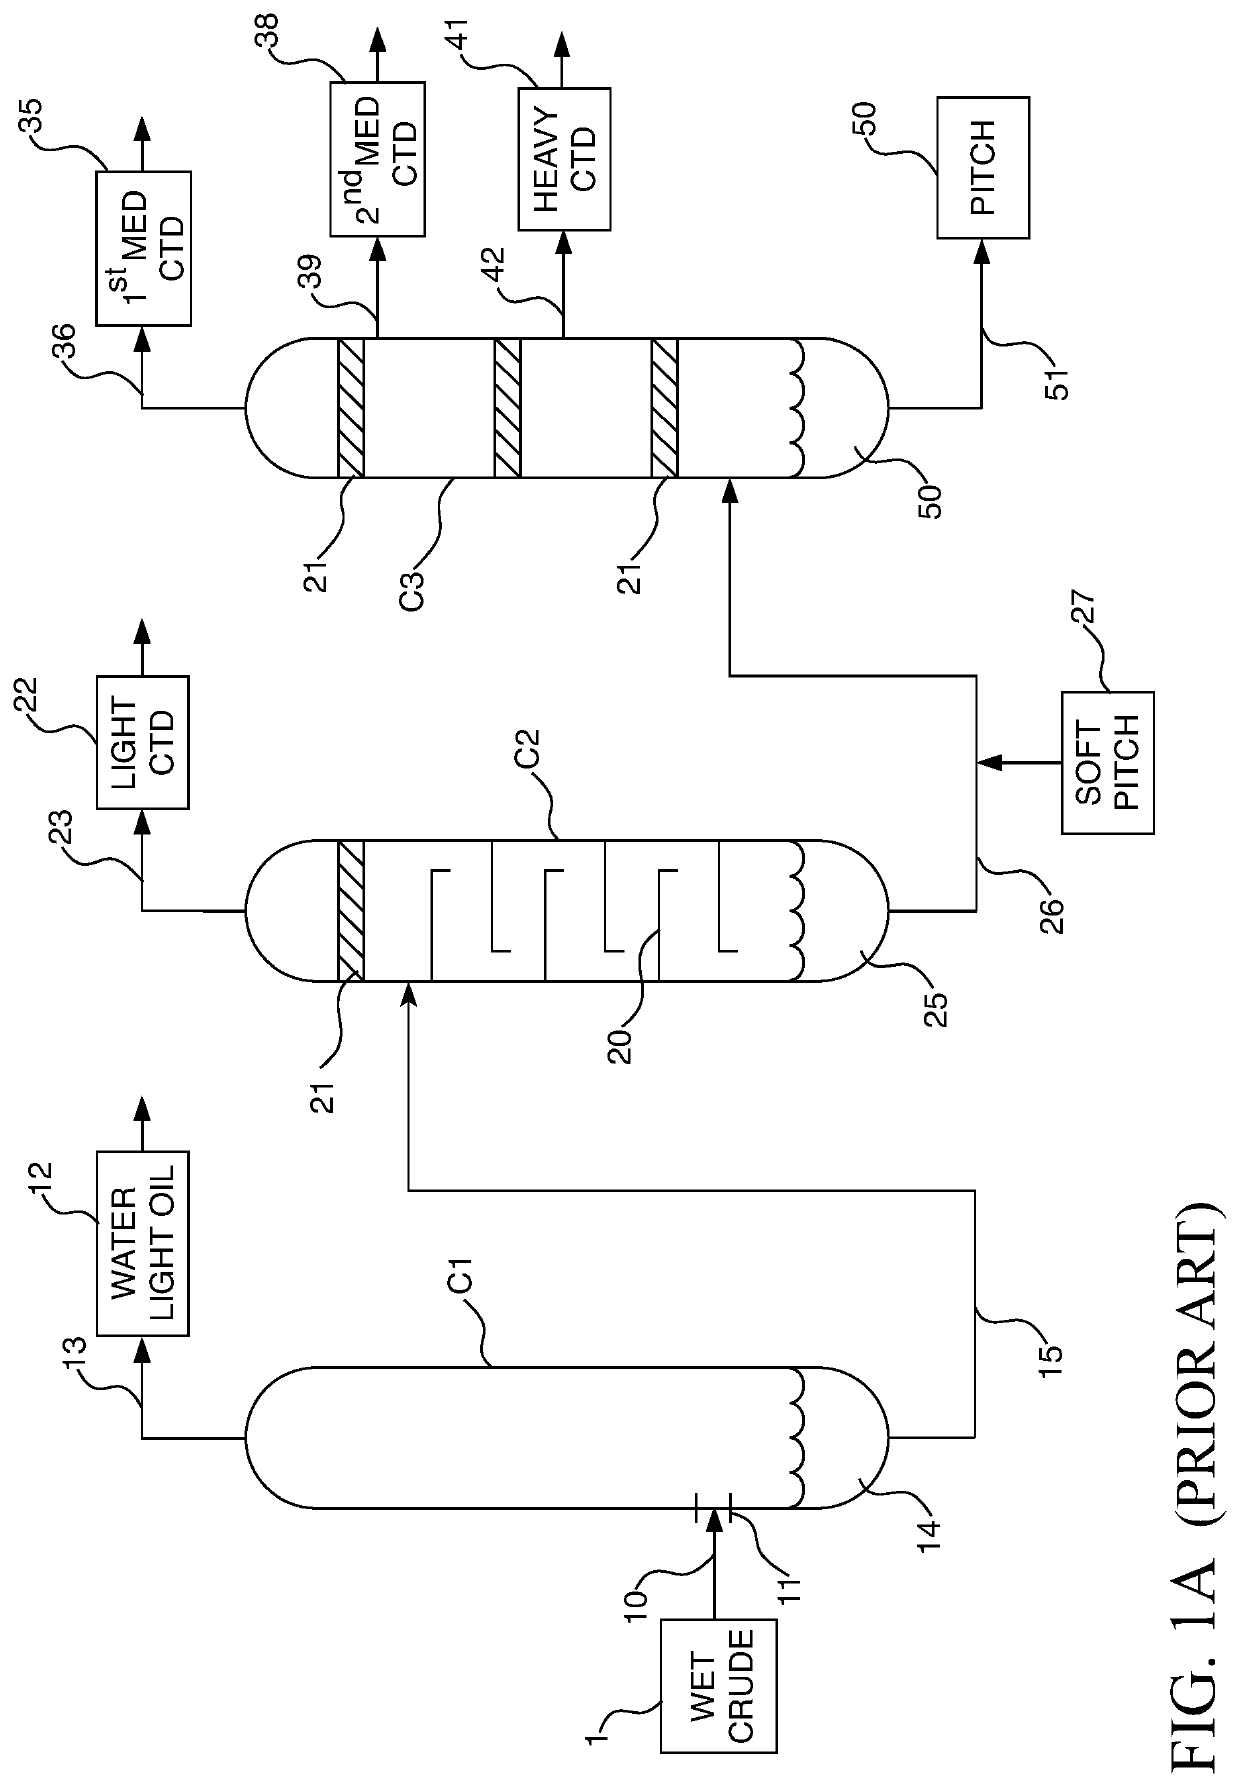 Heat Treatment Process and System for Increased Pitch Yields